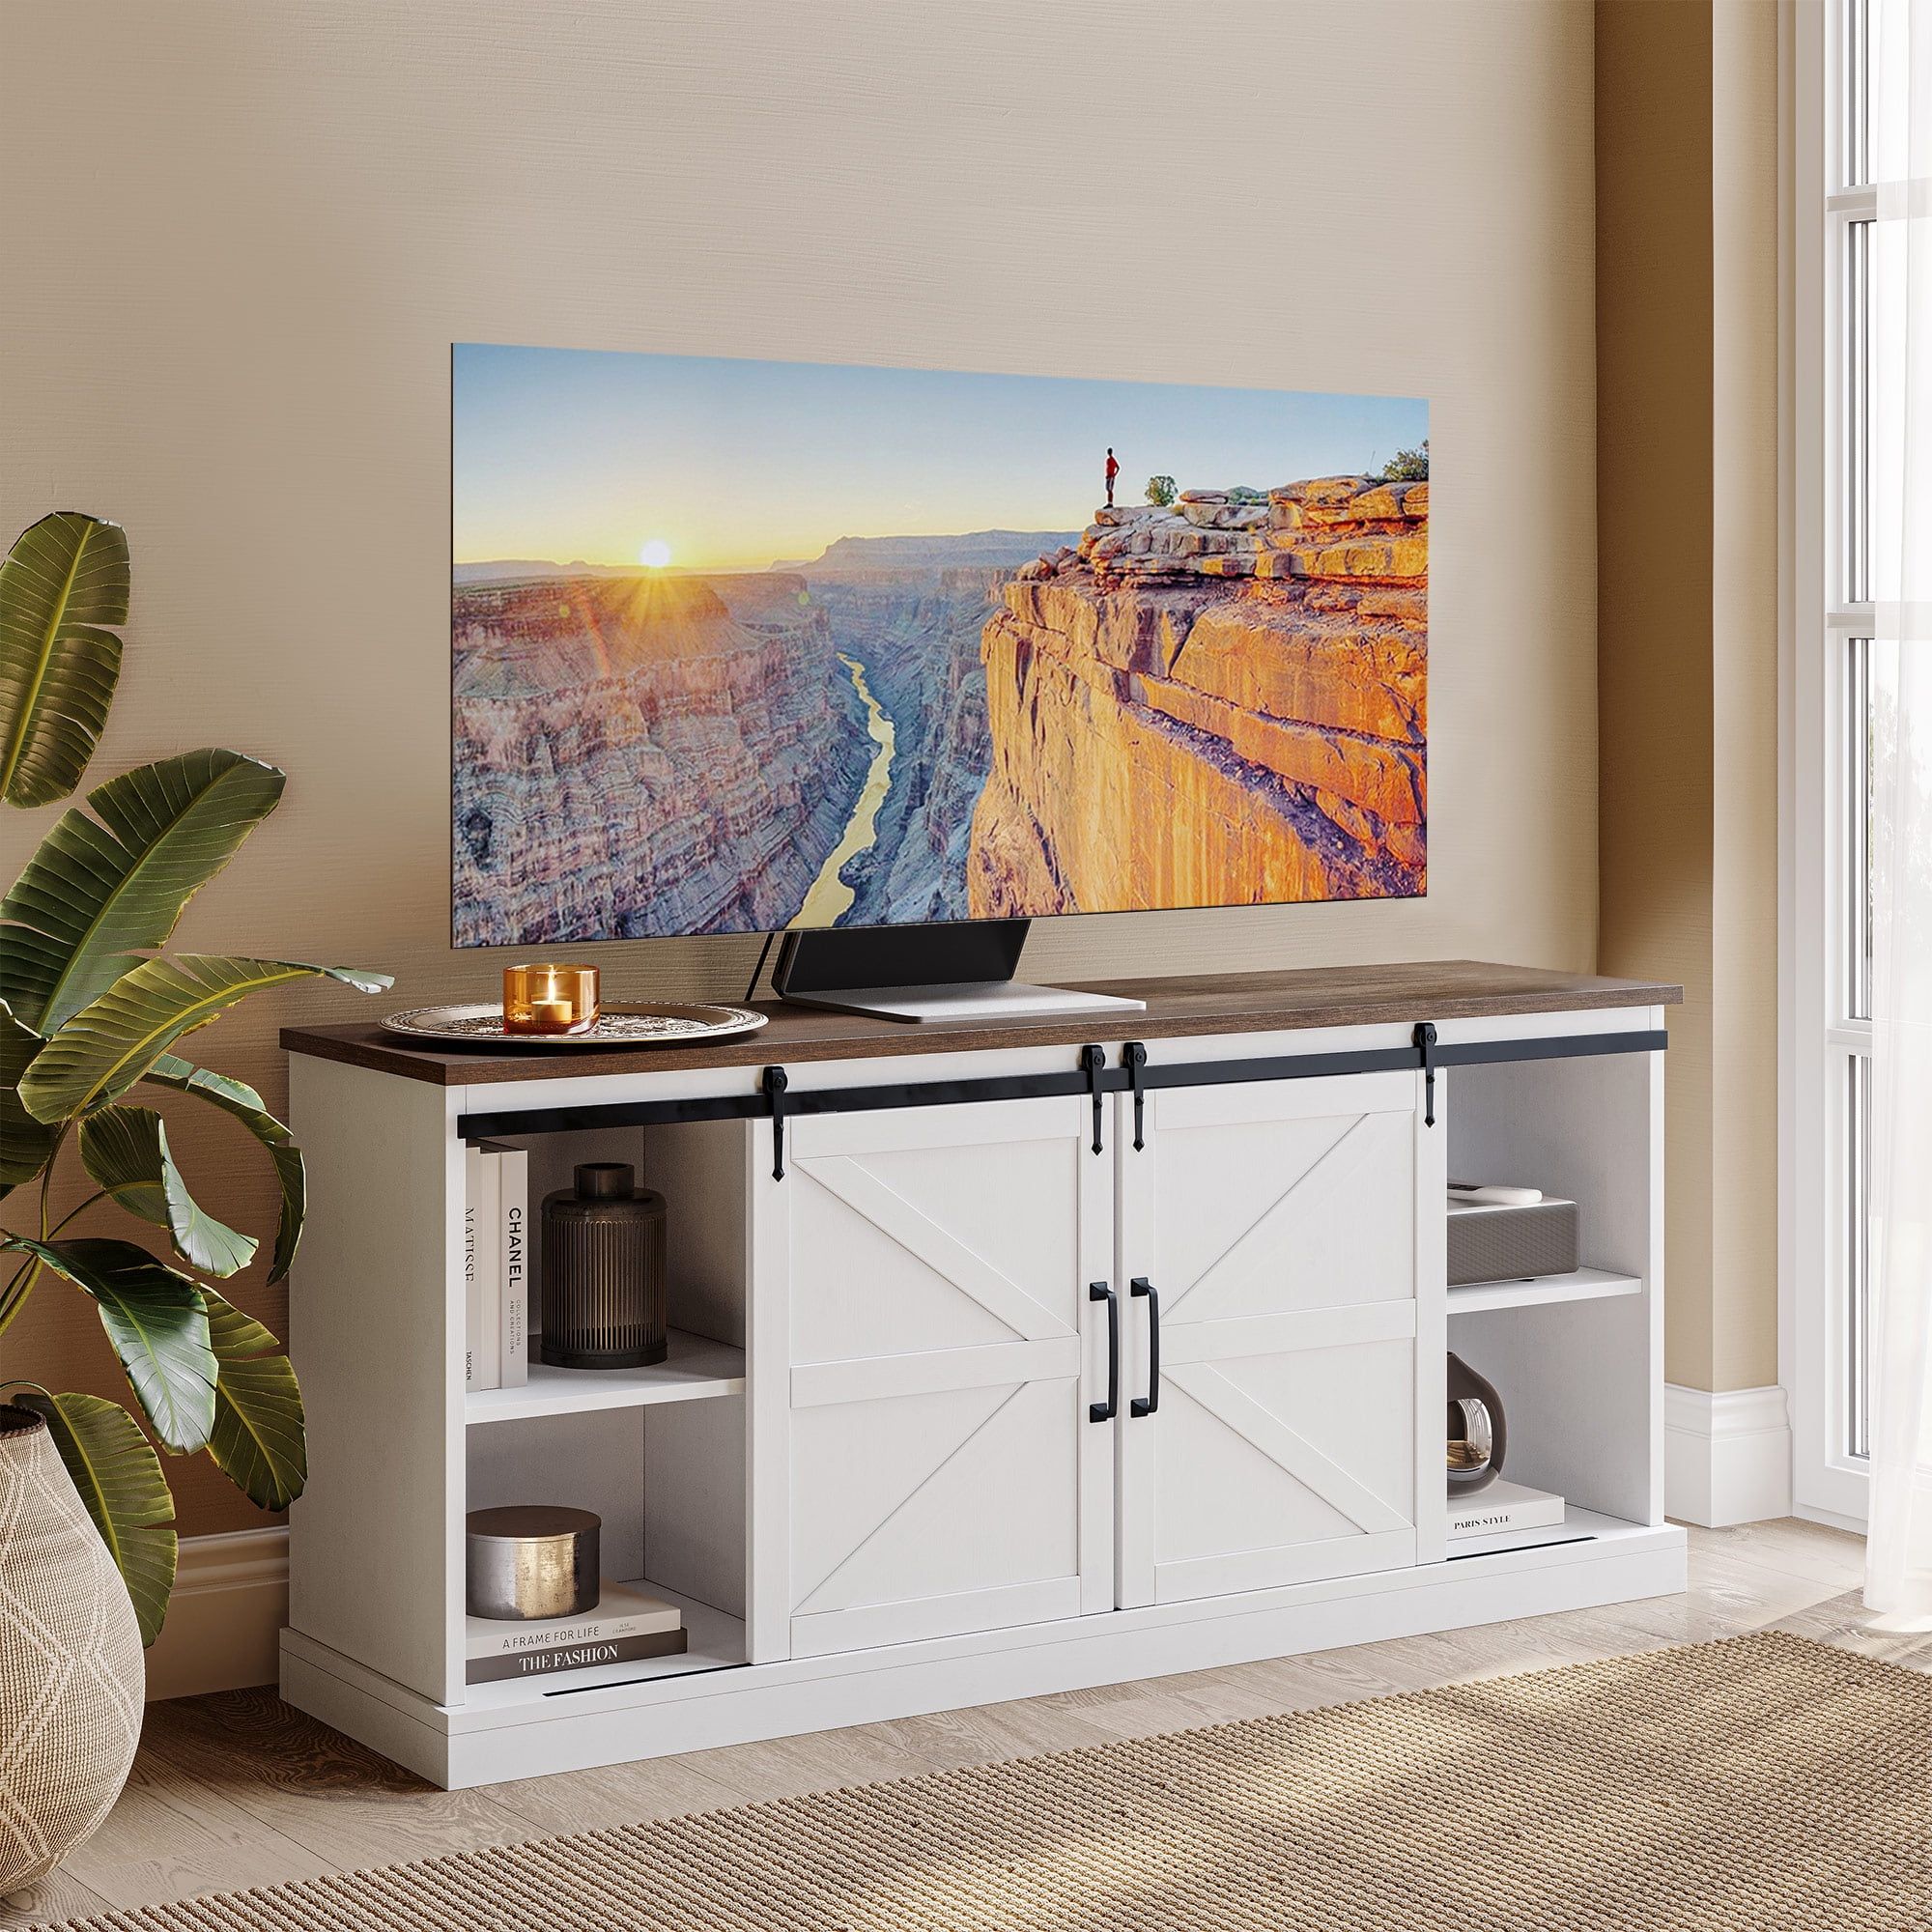 Belleze 58" Tv Stand For Tvs Up To 65", Sliding Barn Door Tv Stand With  Adjustable Side Shelves, Farmhouse Media Console, Rustic Wood Tv Cabinet  Home Entertainment Center With Storage – Truman (White) – Walmart Throughout Farmhouse Media Entertainment Centers (View 11 of 15)